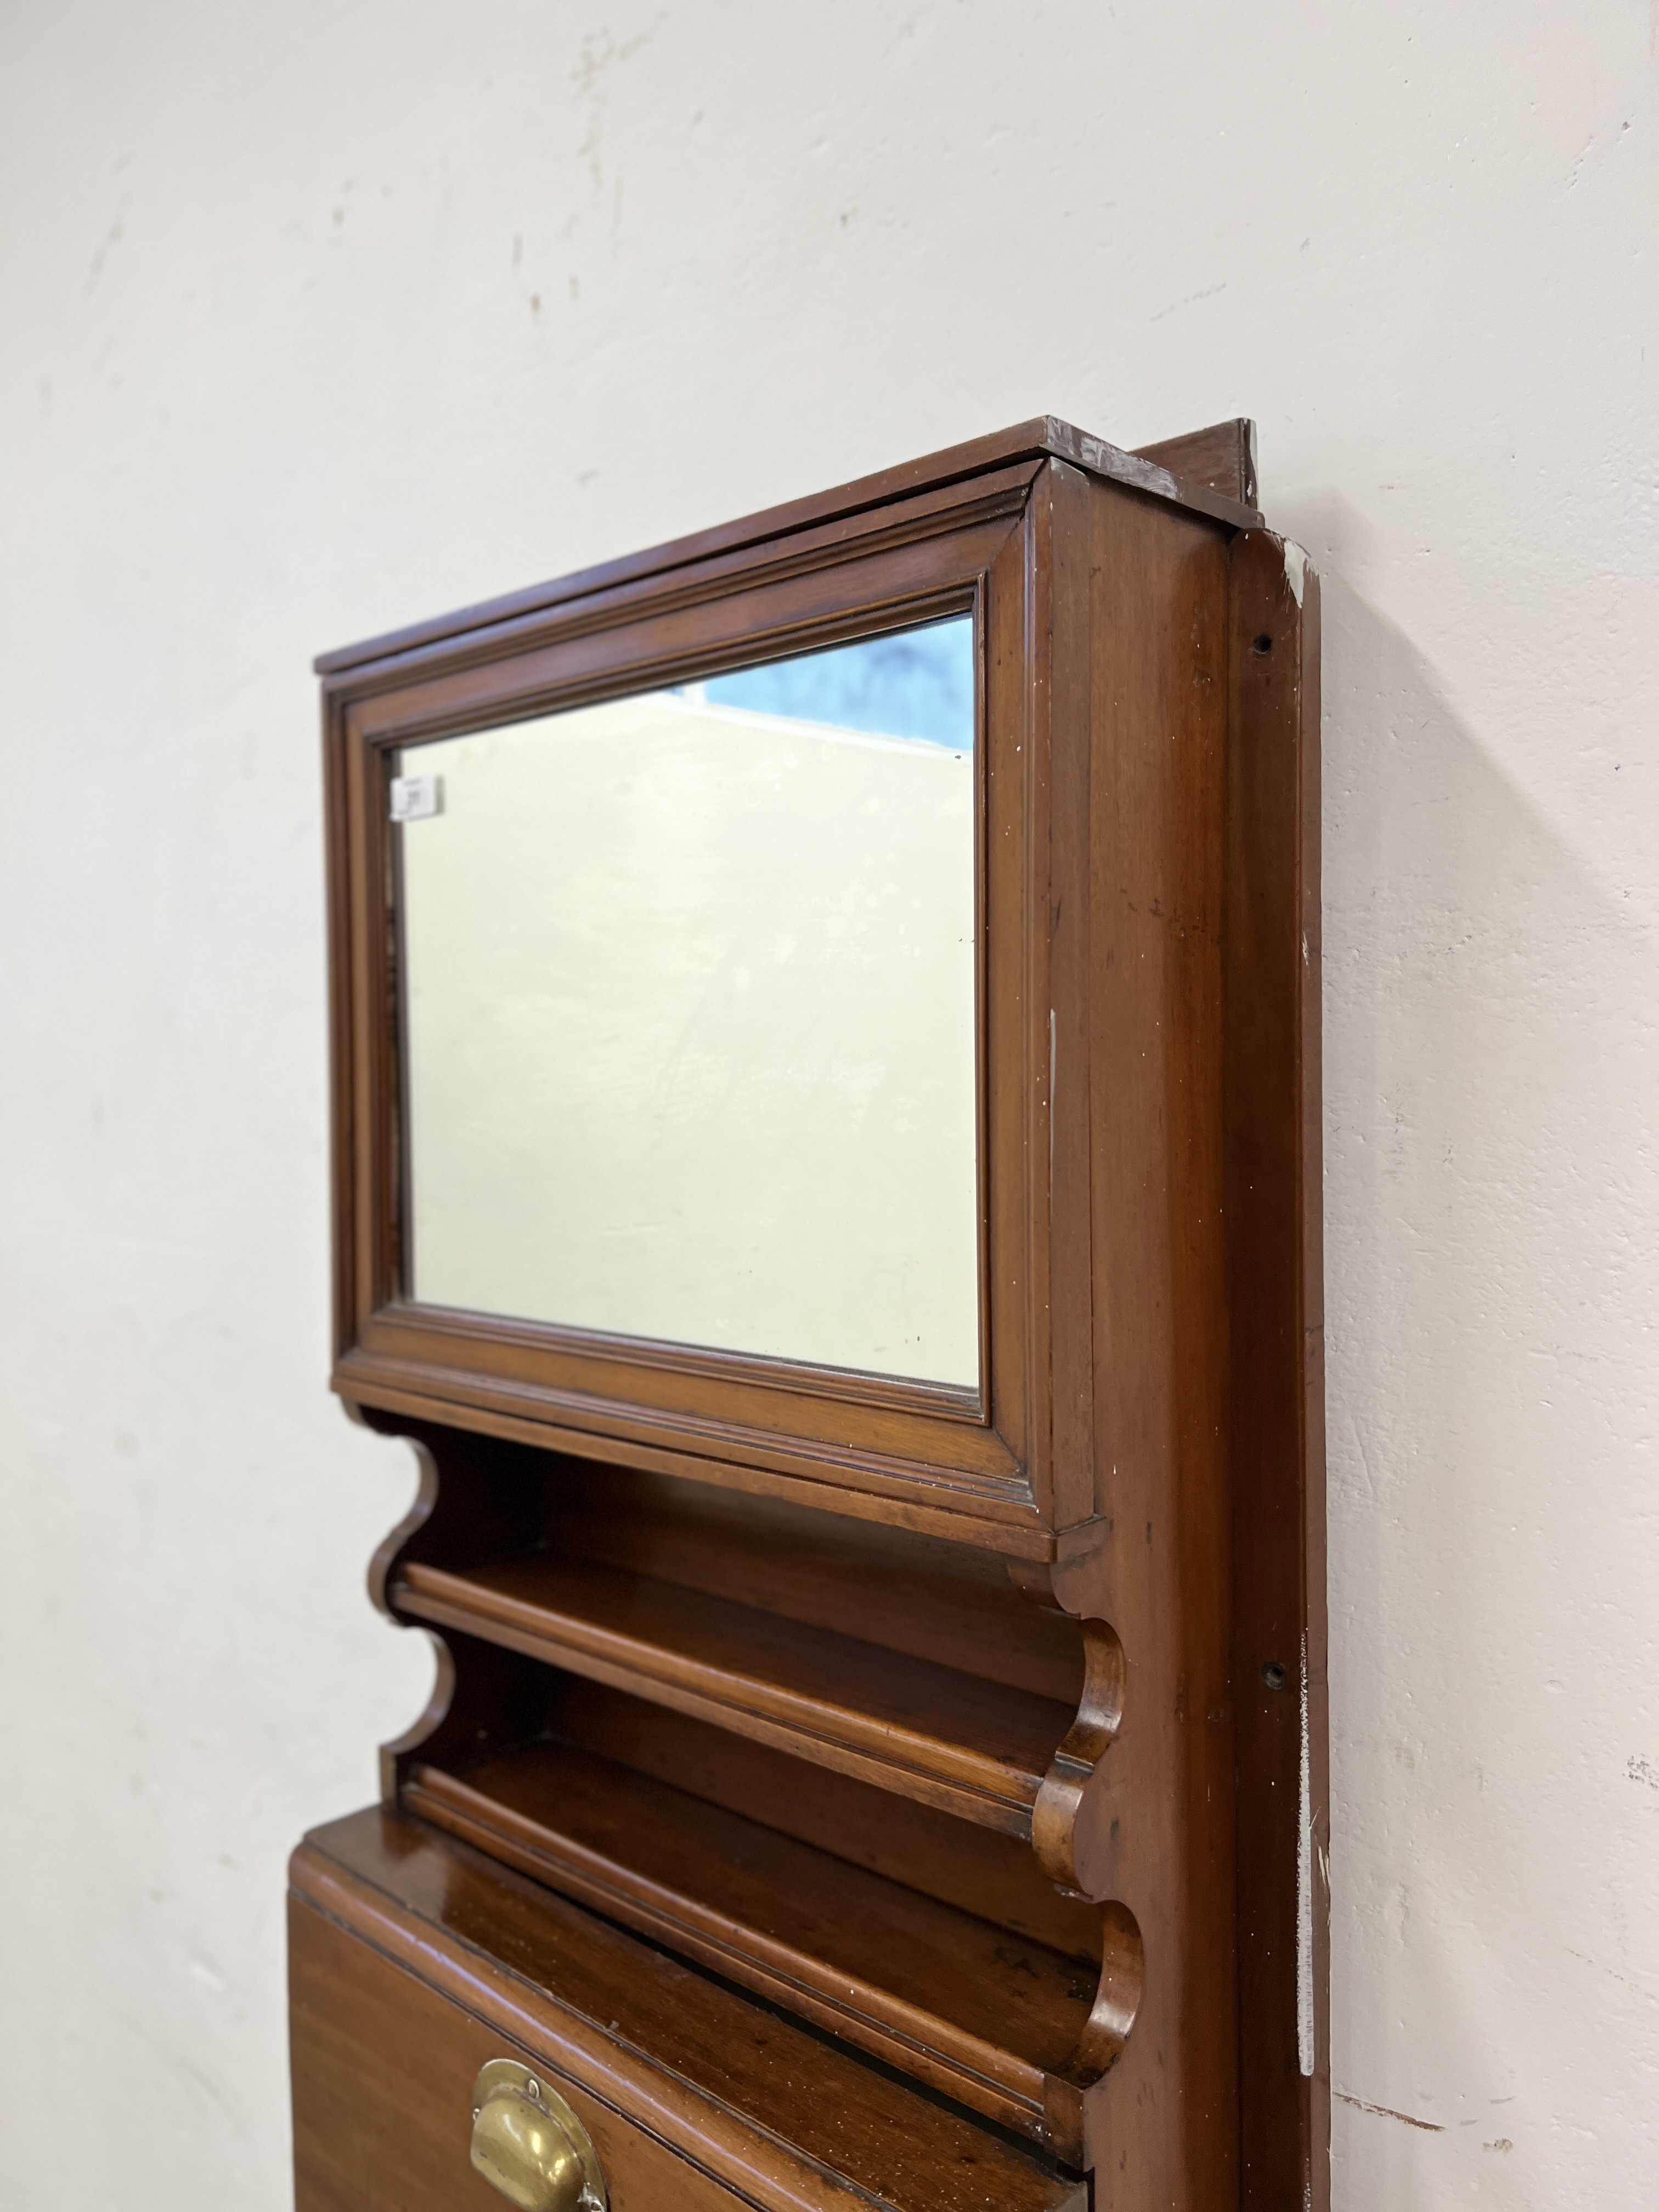 A VICTORIAN MAHOGANY SHIP'S WASH STAND WITH MIRRORED DOOR ABOVE - W 54CM X D 29CM X H 164CM. - Image 3 of 9